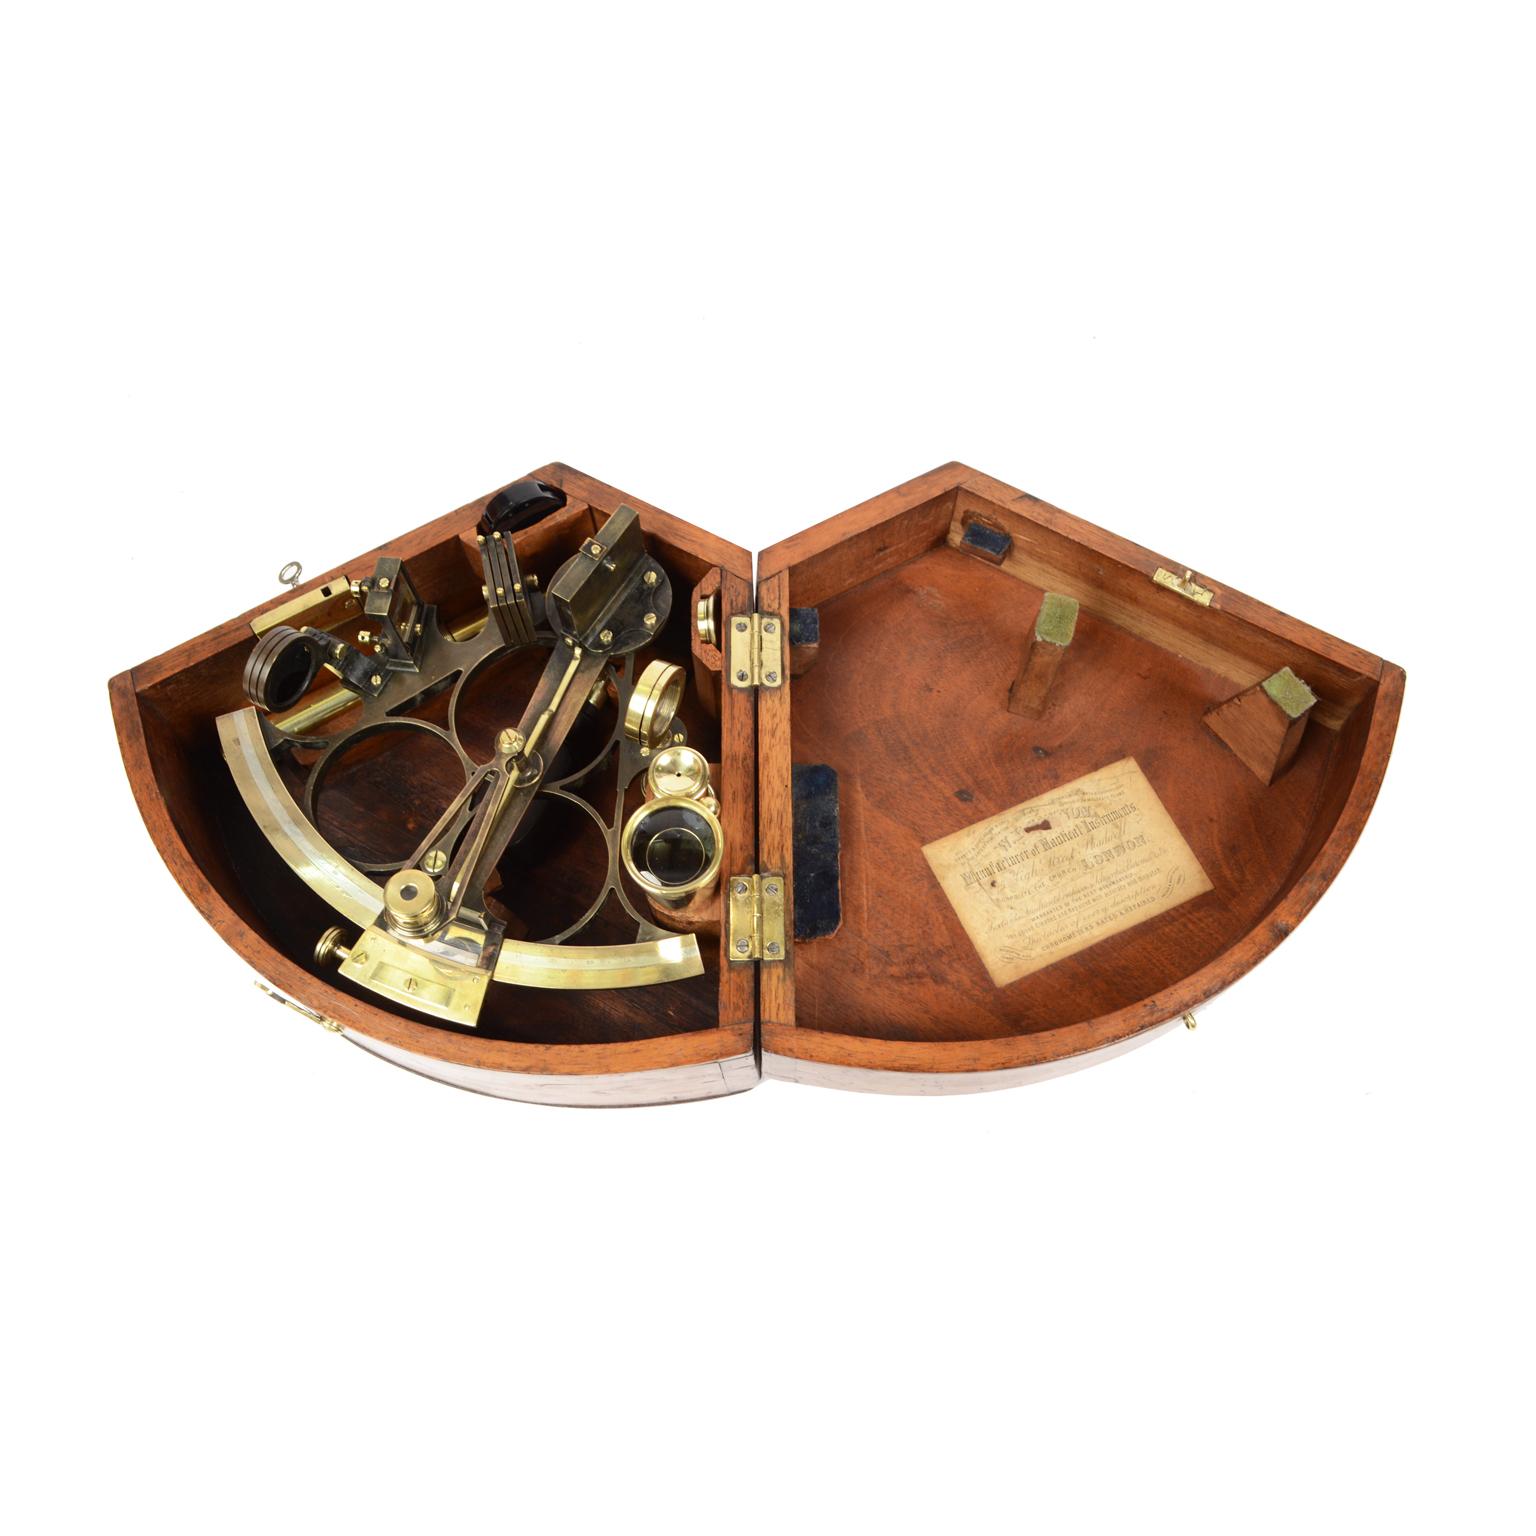 British Burnished Brass Sextant Made in the Second Half of the 19th Century